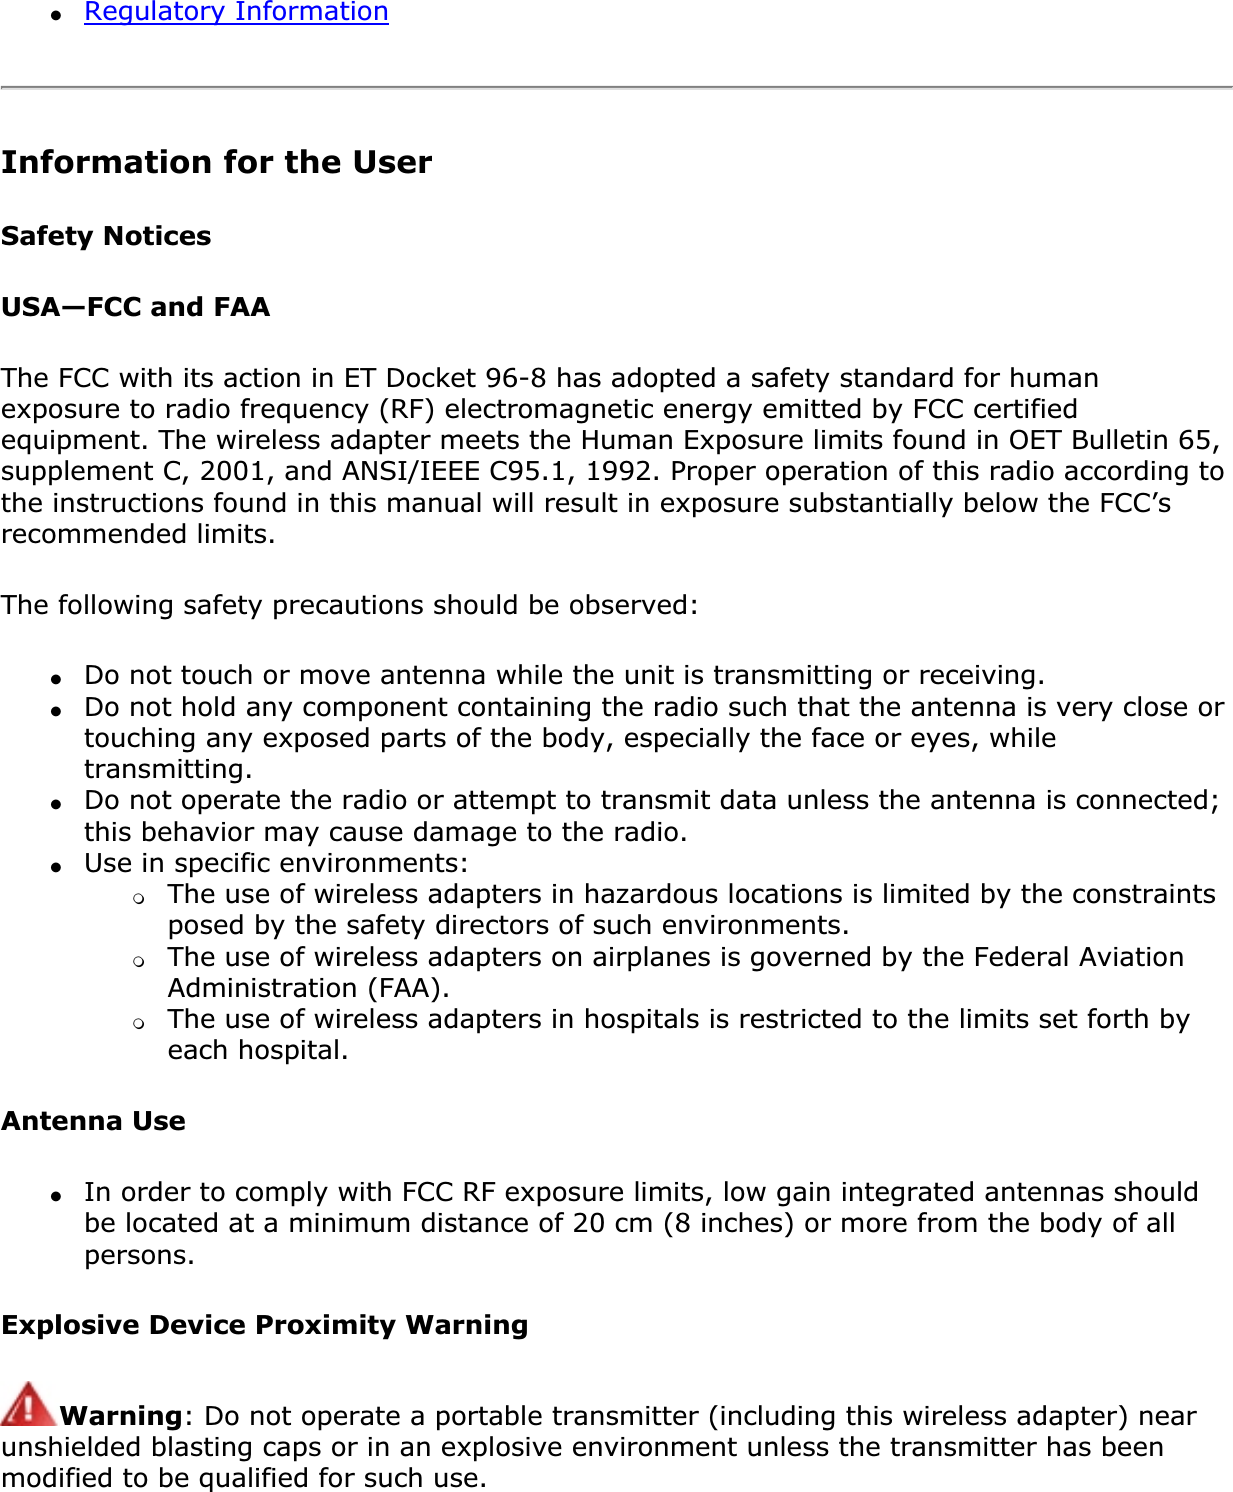 ●Regulatory InformationInformation for the UserSafety NoticesUSA—FCC and FAAThe FCC with its action in ET Docket 96-8 has adopted a safety standard for human exposure to radio frequency (RF) electromagnetic energy emitted by FCC certified equipment. The wireless adapter meets the Human Exposure limits found in OET Bulletin 65, supplement C, 2001, and ANSI/IEEE C95.1, 1992. Proper operation of this radio according to the instructions found in this manual will result in exposure substantially below the FCC’s recommended limits.The following safety precautions should be observed:●Do not touch or move antenna while the unit is transmitting or receiving.●Do not hold any component containing the radio such that the antenna is very close or touching any exposed parts of the body, especially the face or eyes, while transmitting.●Do not operate the radio or attempt to transmit data unless the antenna is connected; this behavior may cause damage to the radio.●Use in specific environments: ❍The use of wireless adapters in hazardous locations is limited by the constraints posed by the safety directors of such environments.❍The use of wireless adapters on airplanes is governed by the Federal Aviation Administration (FAA).❍The use of wireless adapters in hospitals is restricted to the limits set forth by each hospital.Antenna Use●In order to comply with FCC RF exposure limits, low gain integrated antennas should be located at a minimum distance of 20 cm (8 inches) or more from the body of all persons.Explosive Device Proximity WarningWarning: Do not operate a portable transmitter (including this wireless adapter) near unshielded blasting caps or in an explosive environment unless the transmitter has been modified to be qualified for such use.